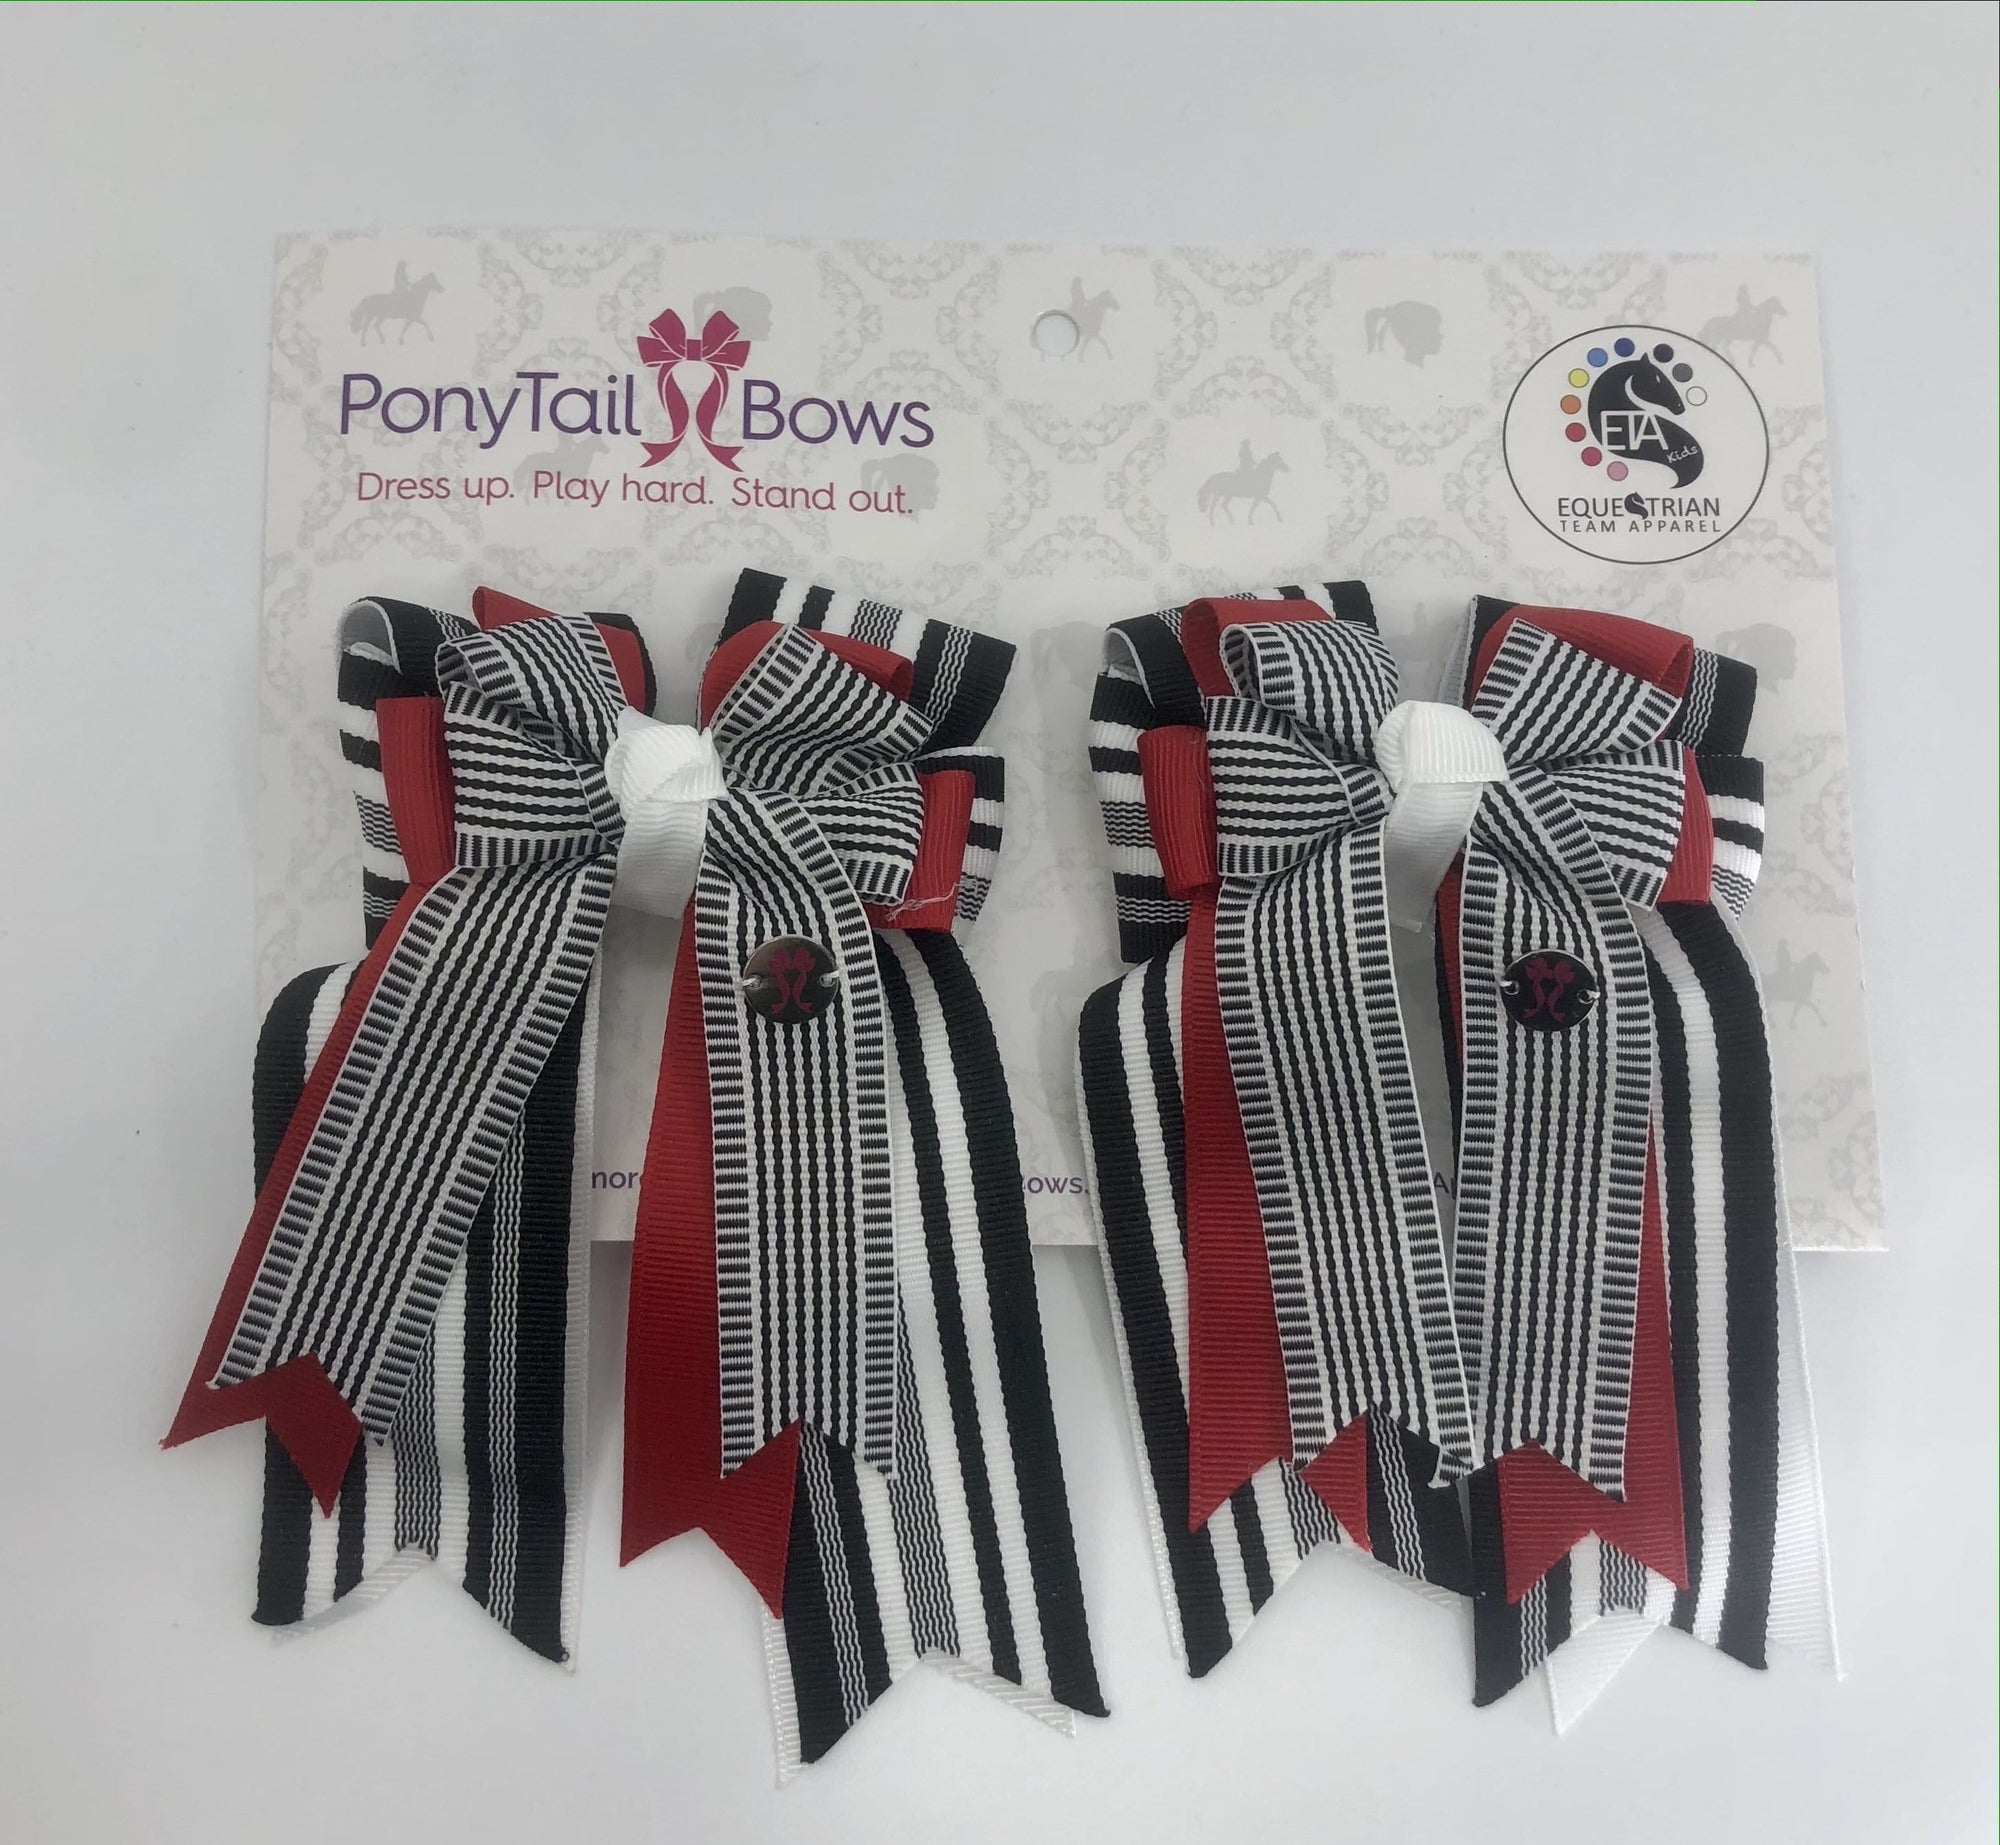 PonyTail Bows 3" Tails Black Red Stripes PonyTail Bows equestrian team apparel online tack store mobile tack store custom farm apparel custom show stable clothing equestrian lifestyle horse show clothing riding clothes PonyTail Bows | Equestrian Hair Accessories horses equestrian tack store